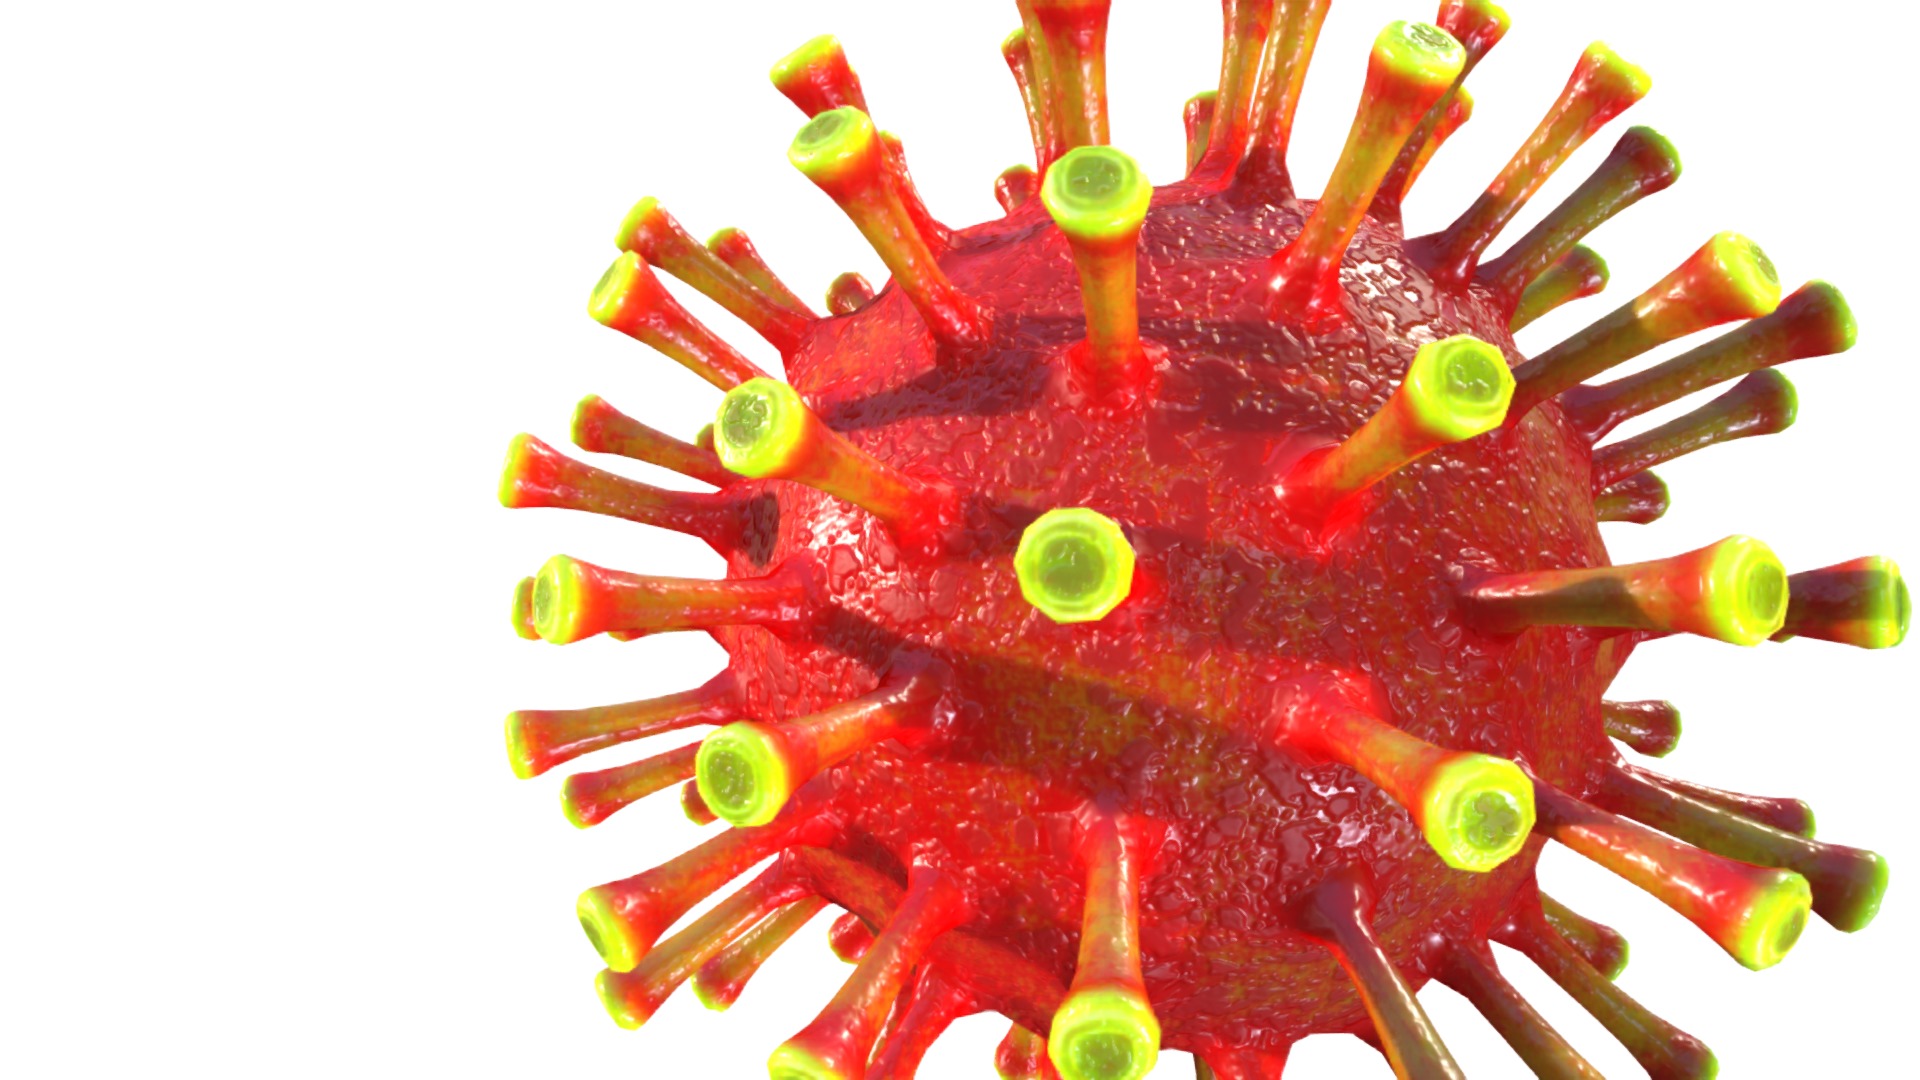 3D model Corona Virus Covid 19 - This is a 3D model of the Corona Virus Covid 19. The 3D model is about a red and yellow octopus.